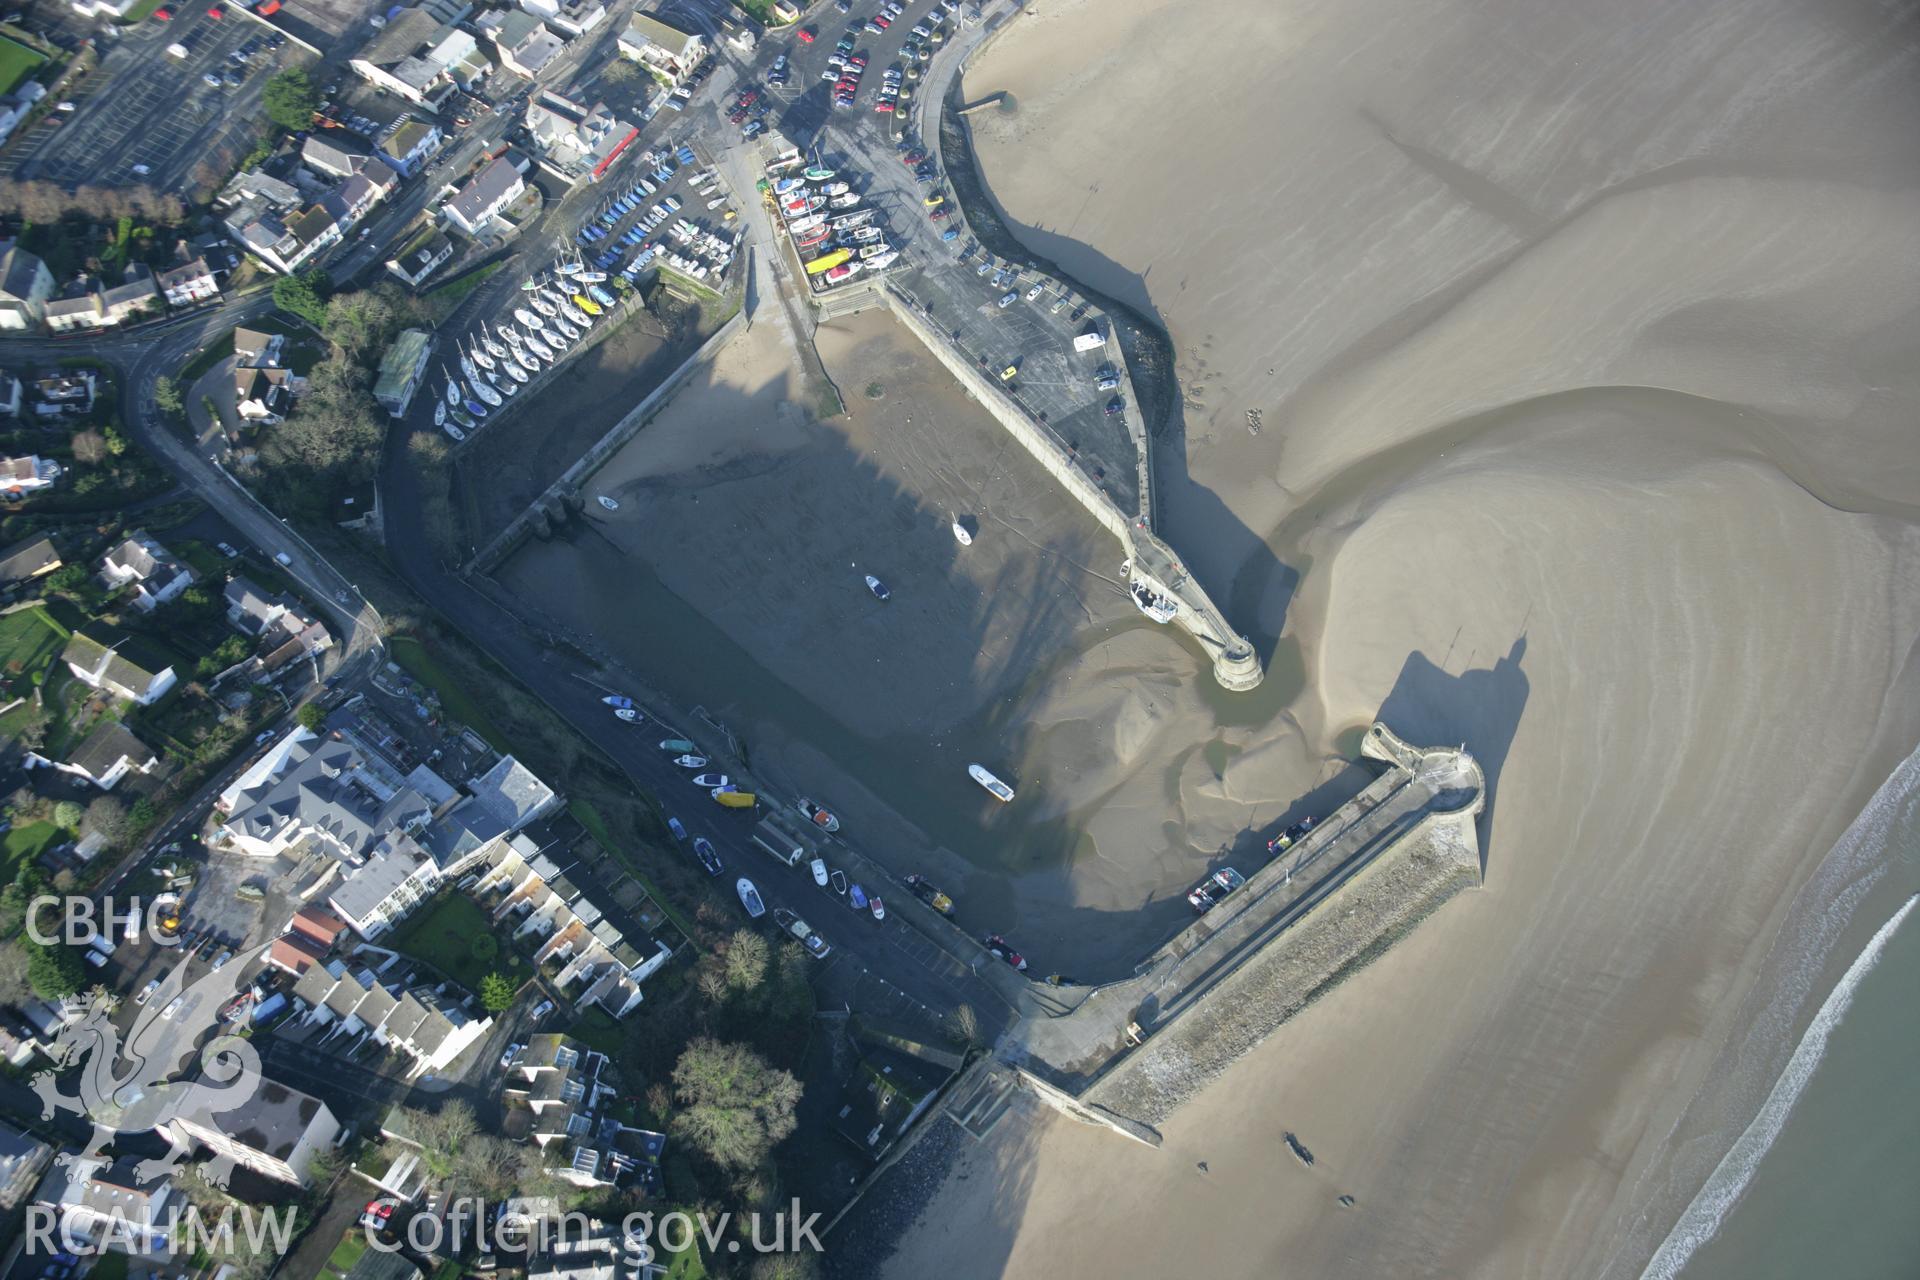 RCAHMW colour oblique aerial photograph of Saundersfoot Harbour from the south-east at high tide. Taken on 11 January 2006 by Toby Driver.